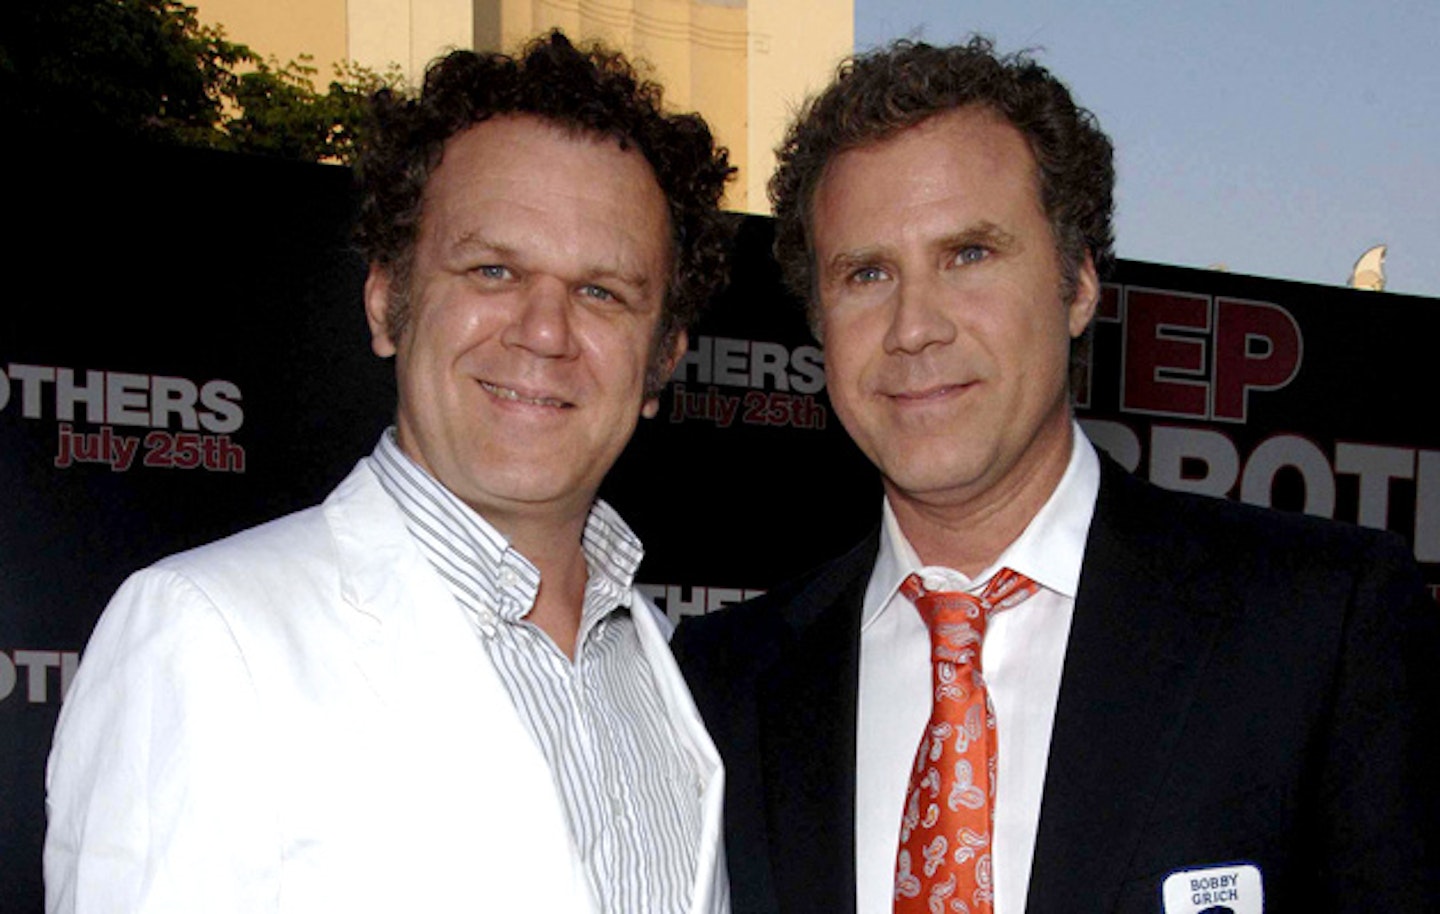 Will-Ferrell-And-John-C-Reilly-Want-To-Be-Border-Guards